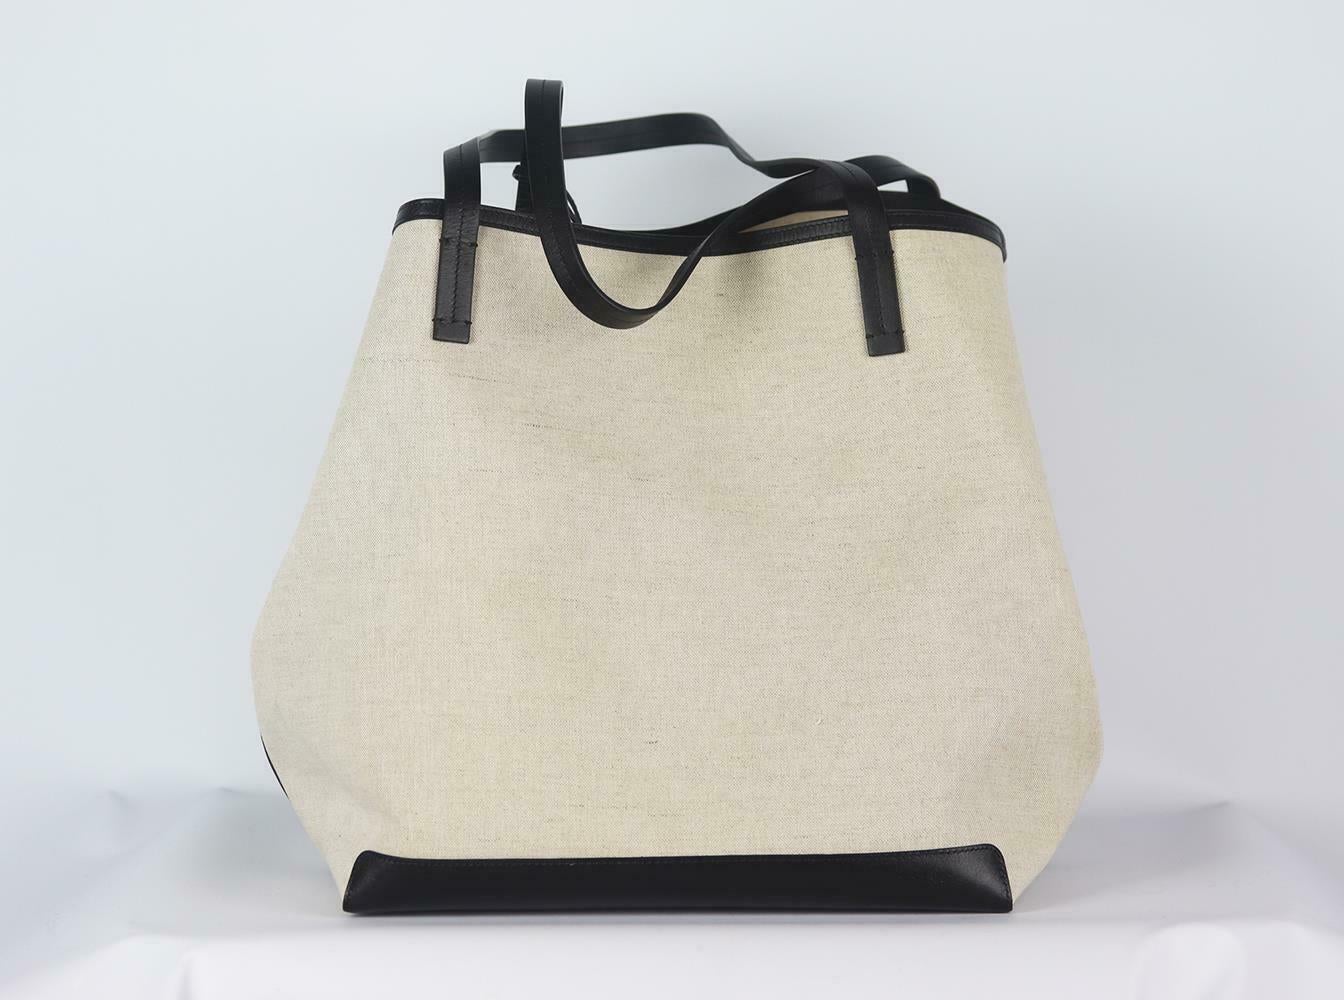 Suited to both long commutes and overnight stays, The Row's pared-back 'Park XL' tote has been made in Italy from durable canvas and trimmed with leather. The sturdy base adds structure, while the slim top handles fit comfortably over your shoulder.